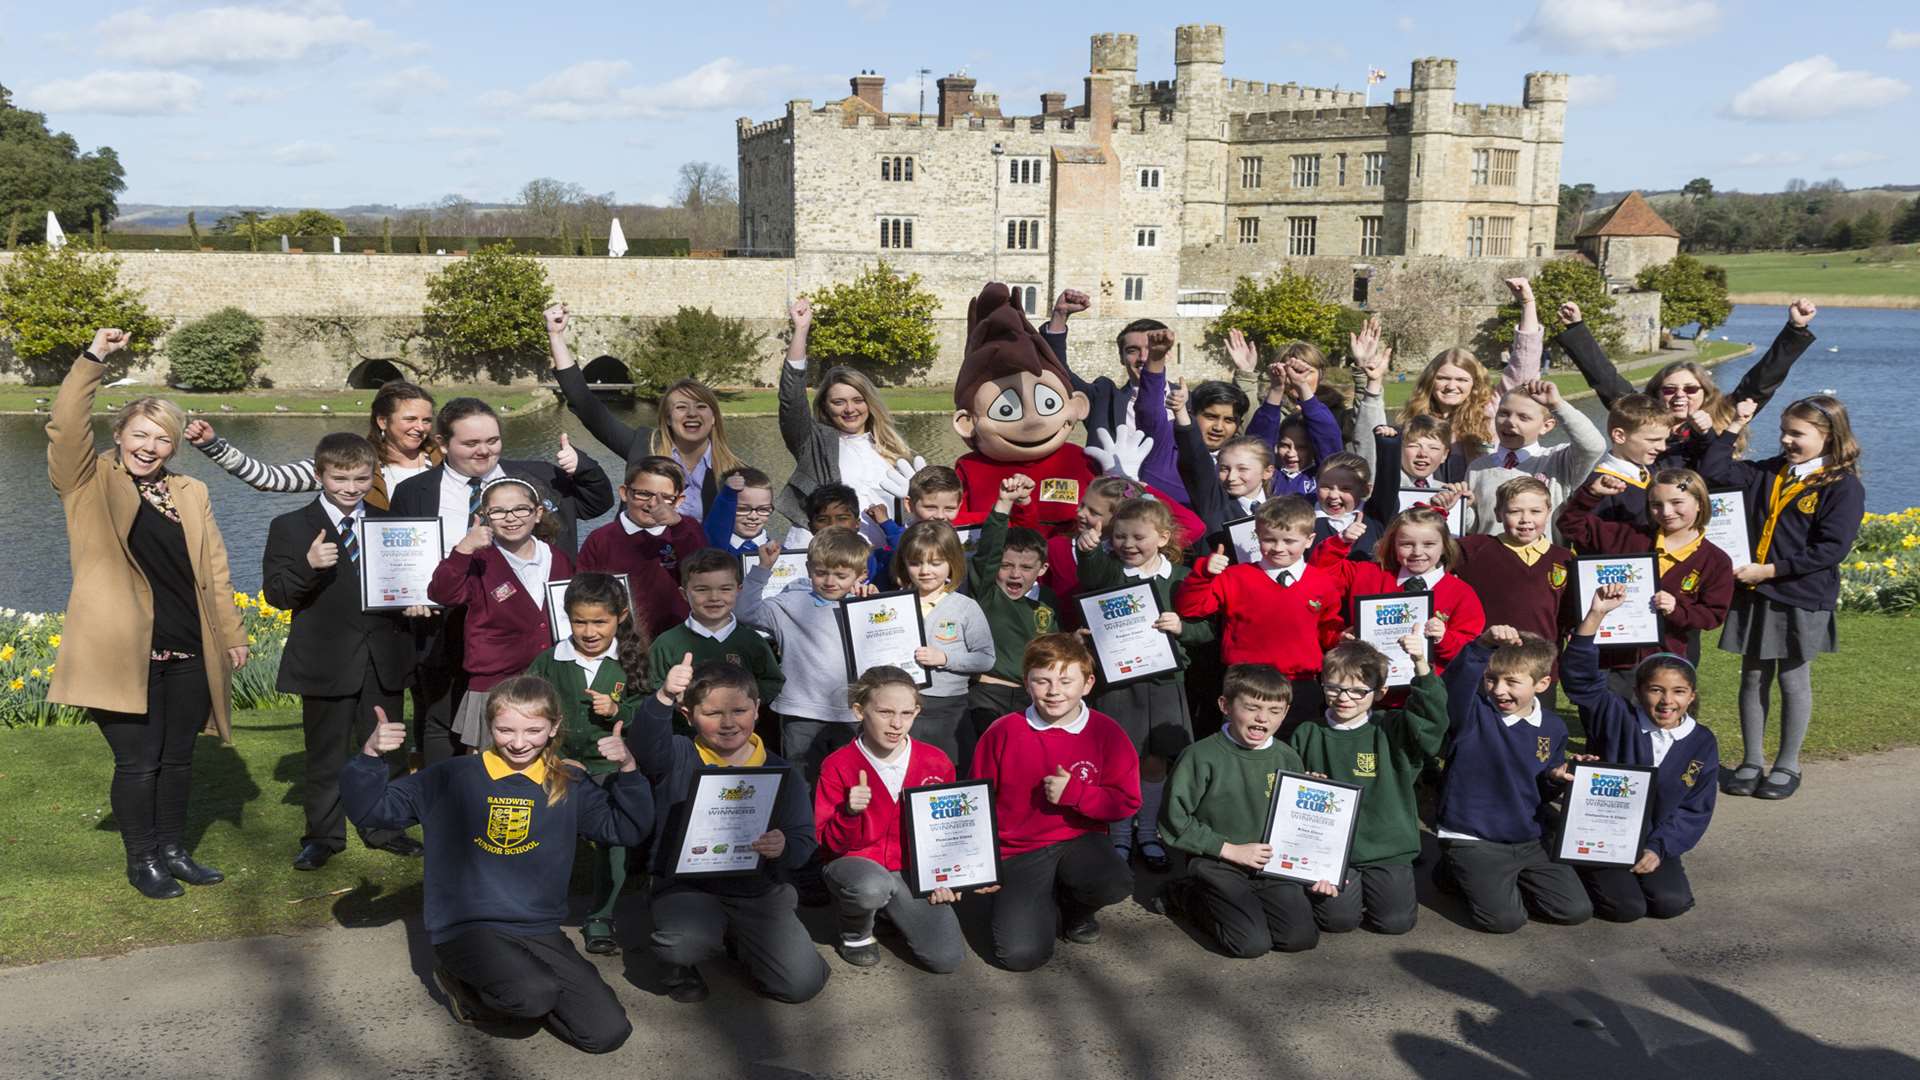 Walk to school and literacy champs joined by WOWser and supporters from KCC, Medway Council, Swale Council, Volker Highways, Countrystyle Recycling, Kent Libraries, Kent Reliance to celebrate at Leeds Castle.